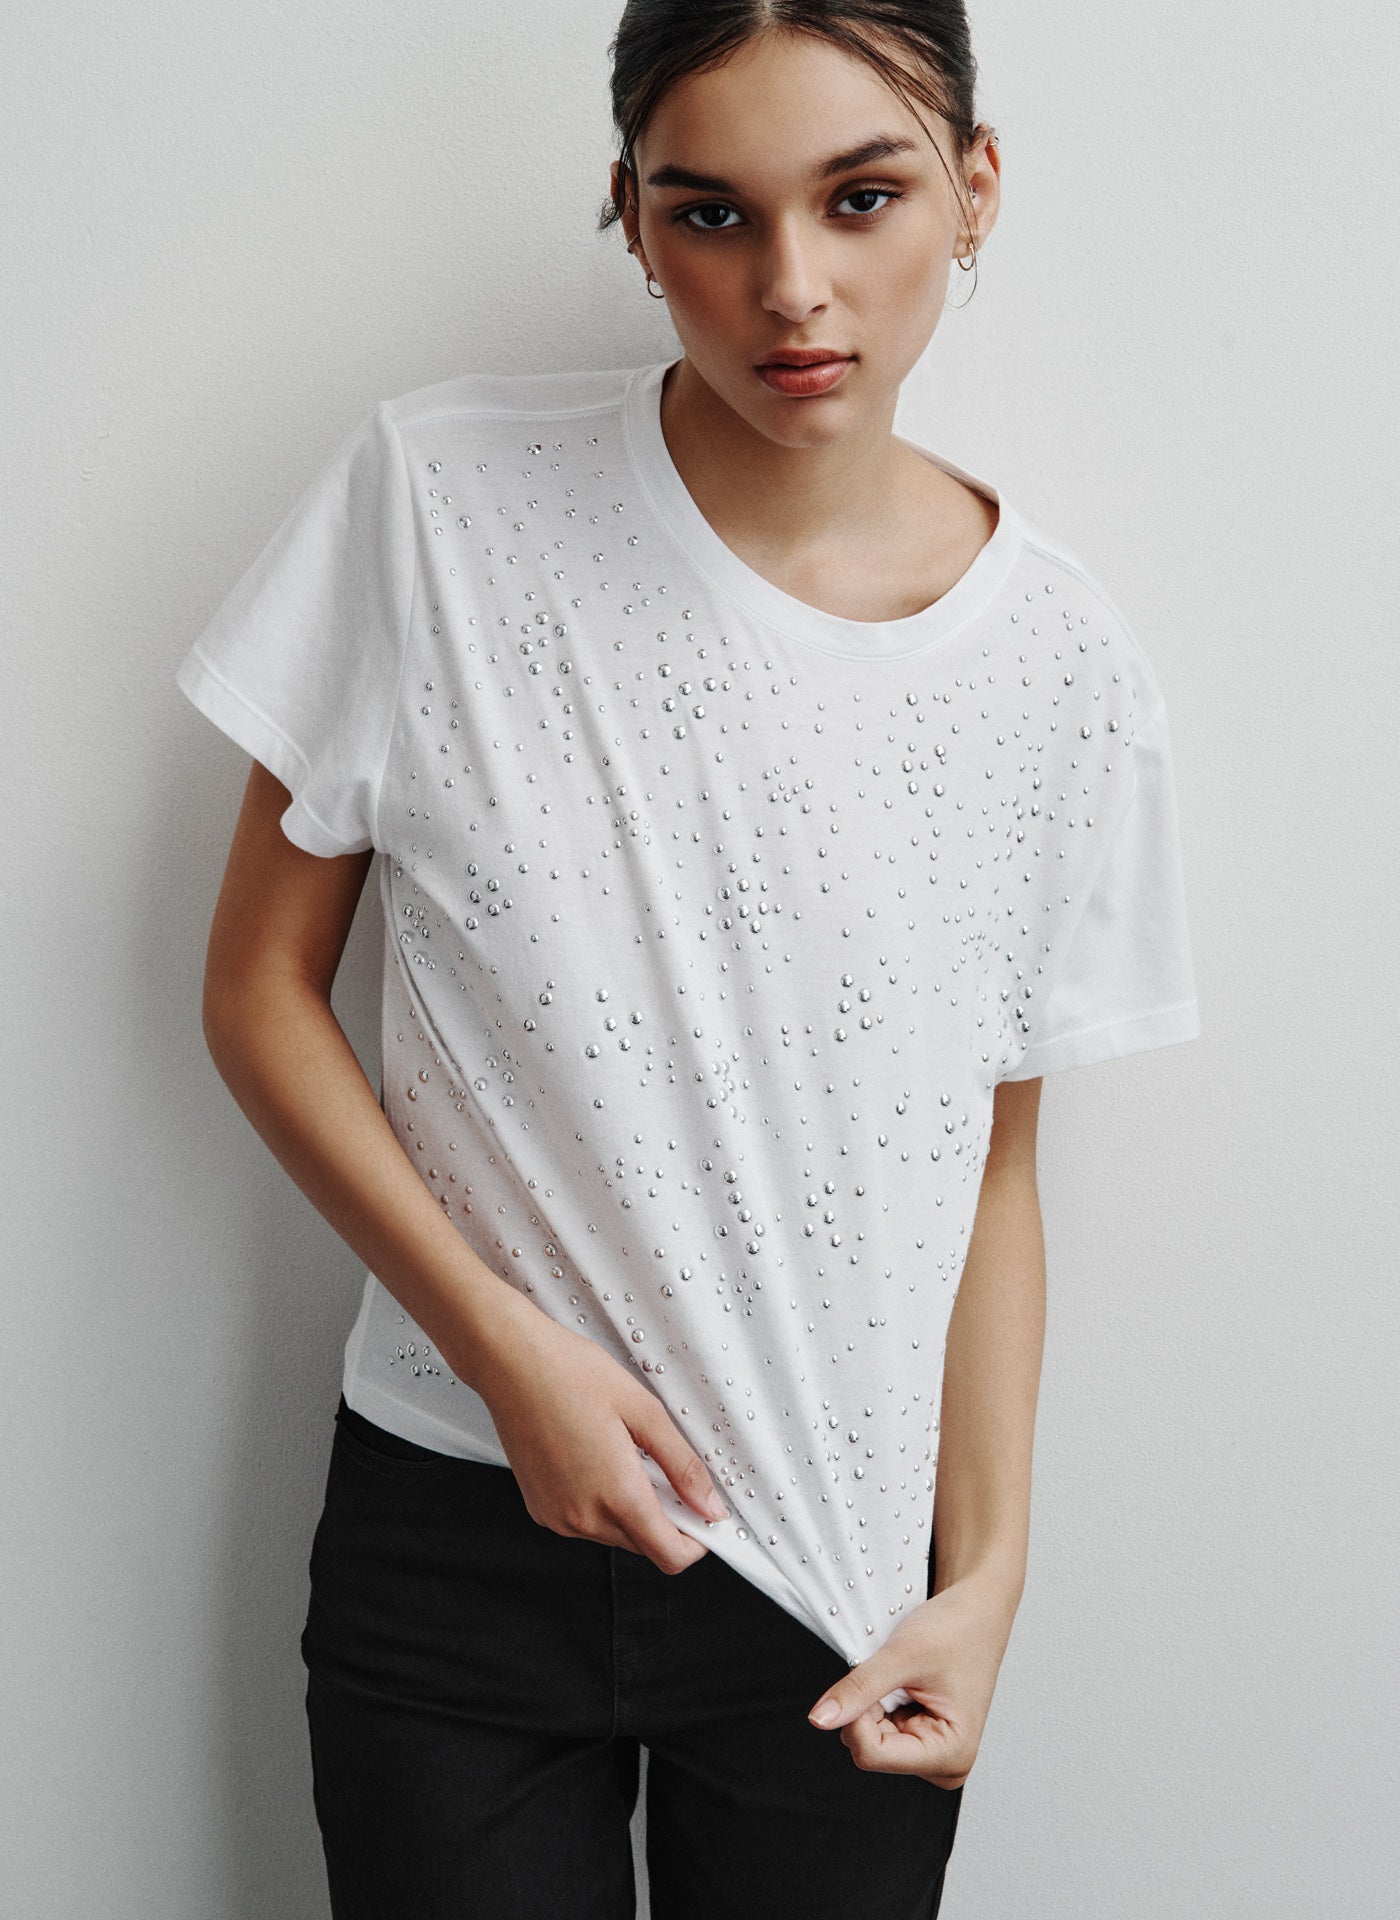 DKNY SCATTERED DOME STUDS BOXY TEE,White